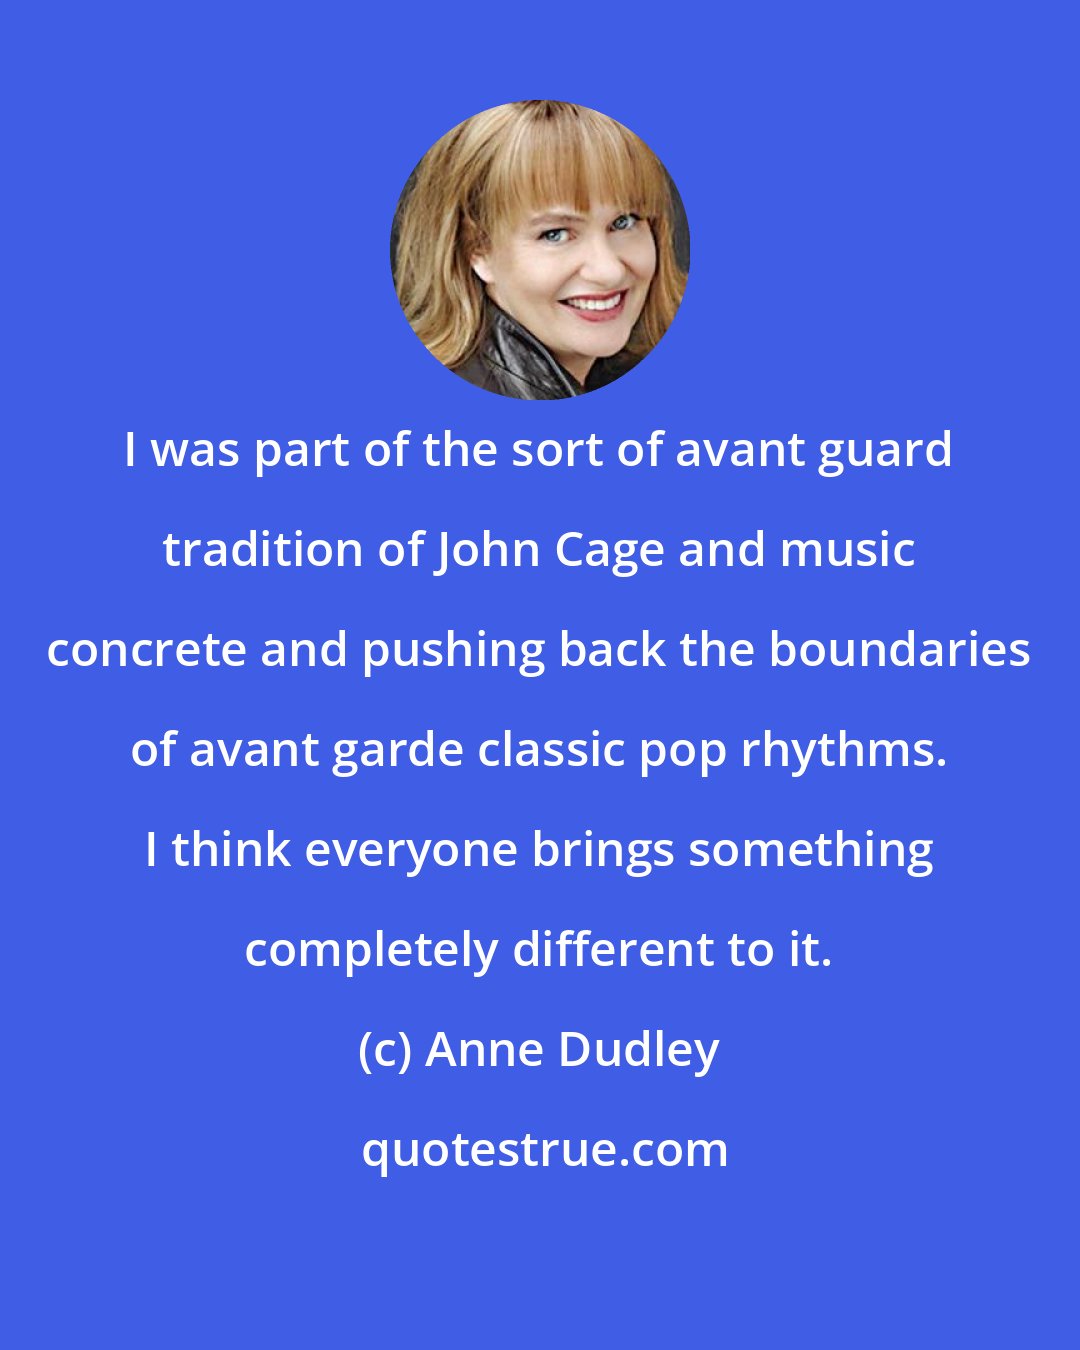 Anne Dudley: I was part of the sort of avant guard tradition of John Cage and music concrete and pushing back the boundaries of avant garde classic pop rhythms. I think everyone brings something completely different to it.